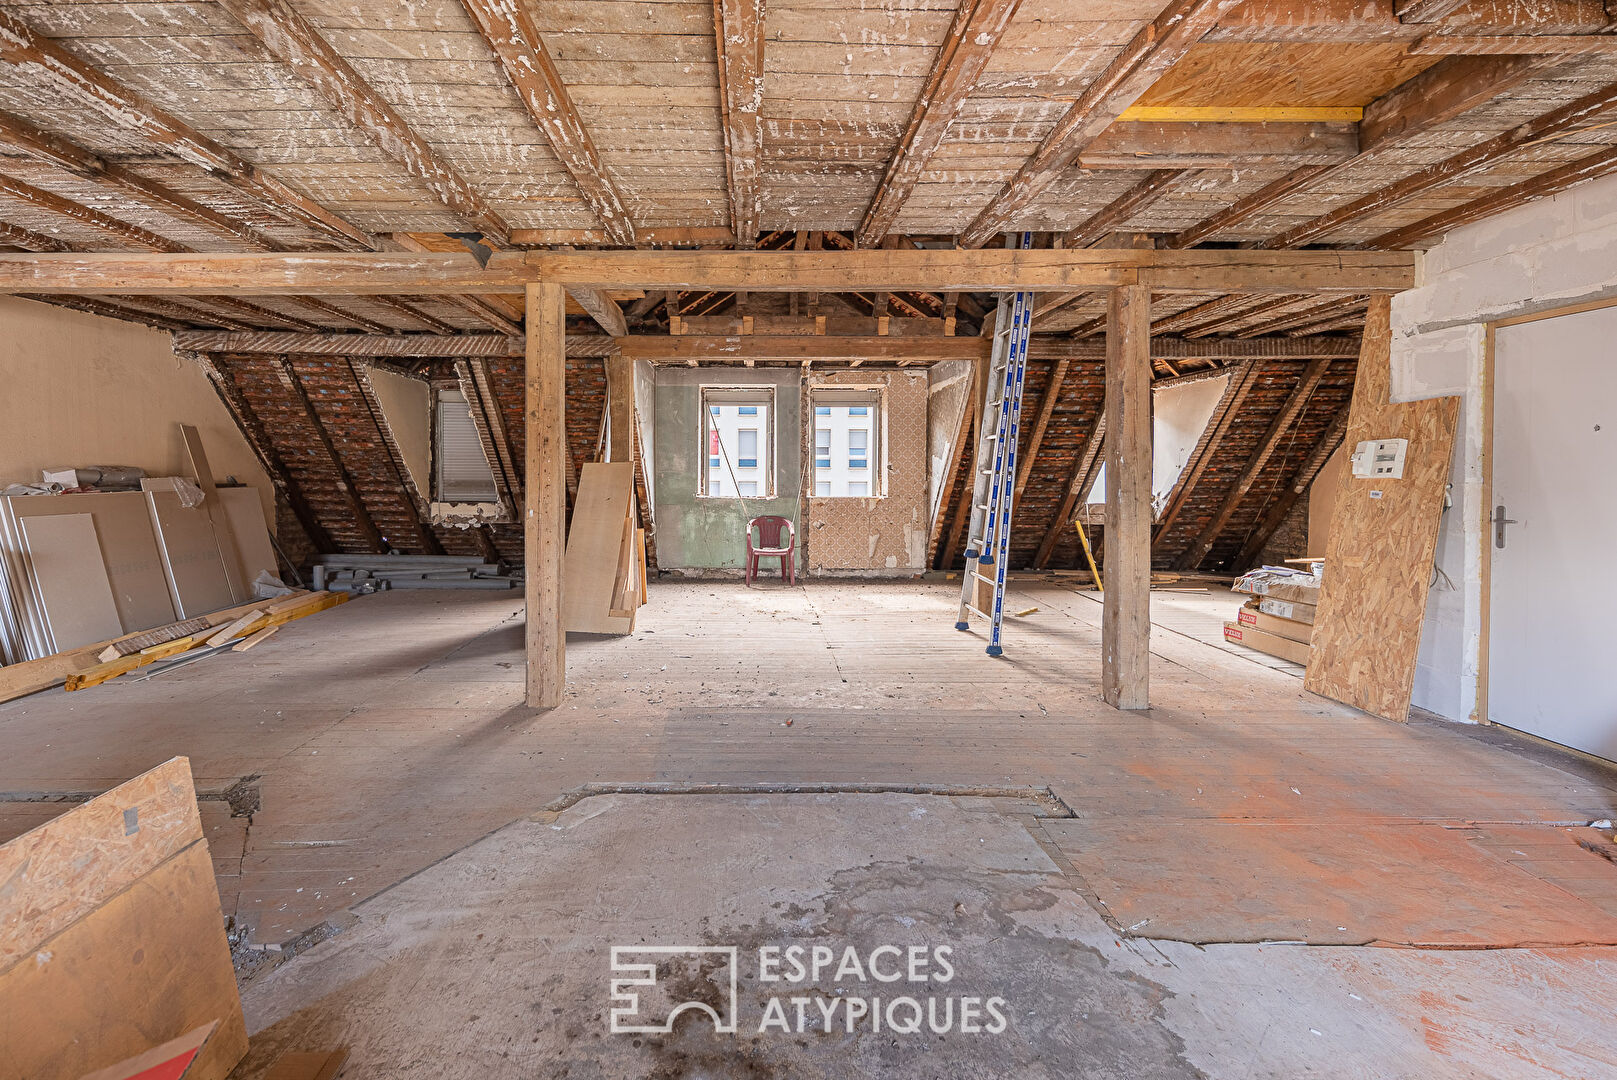 Rough-cut flat under the roof